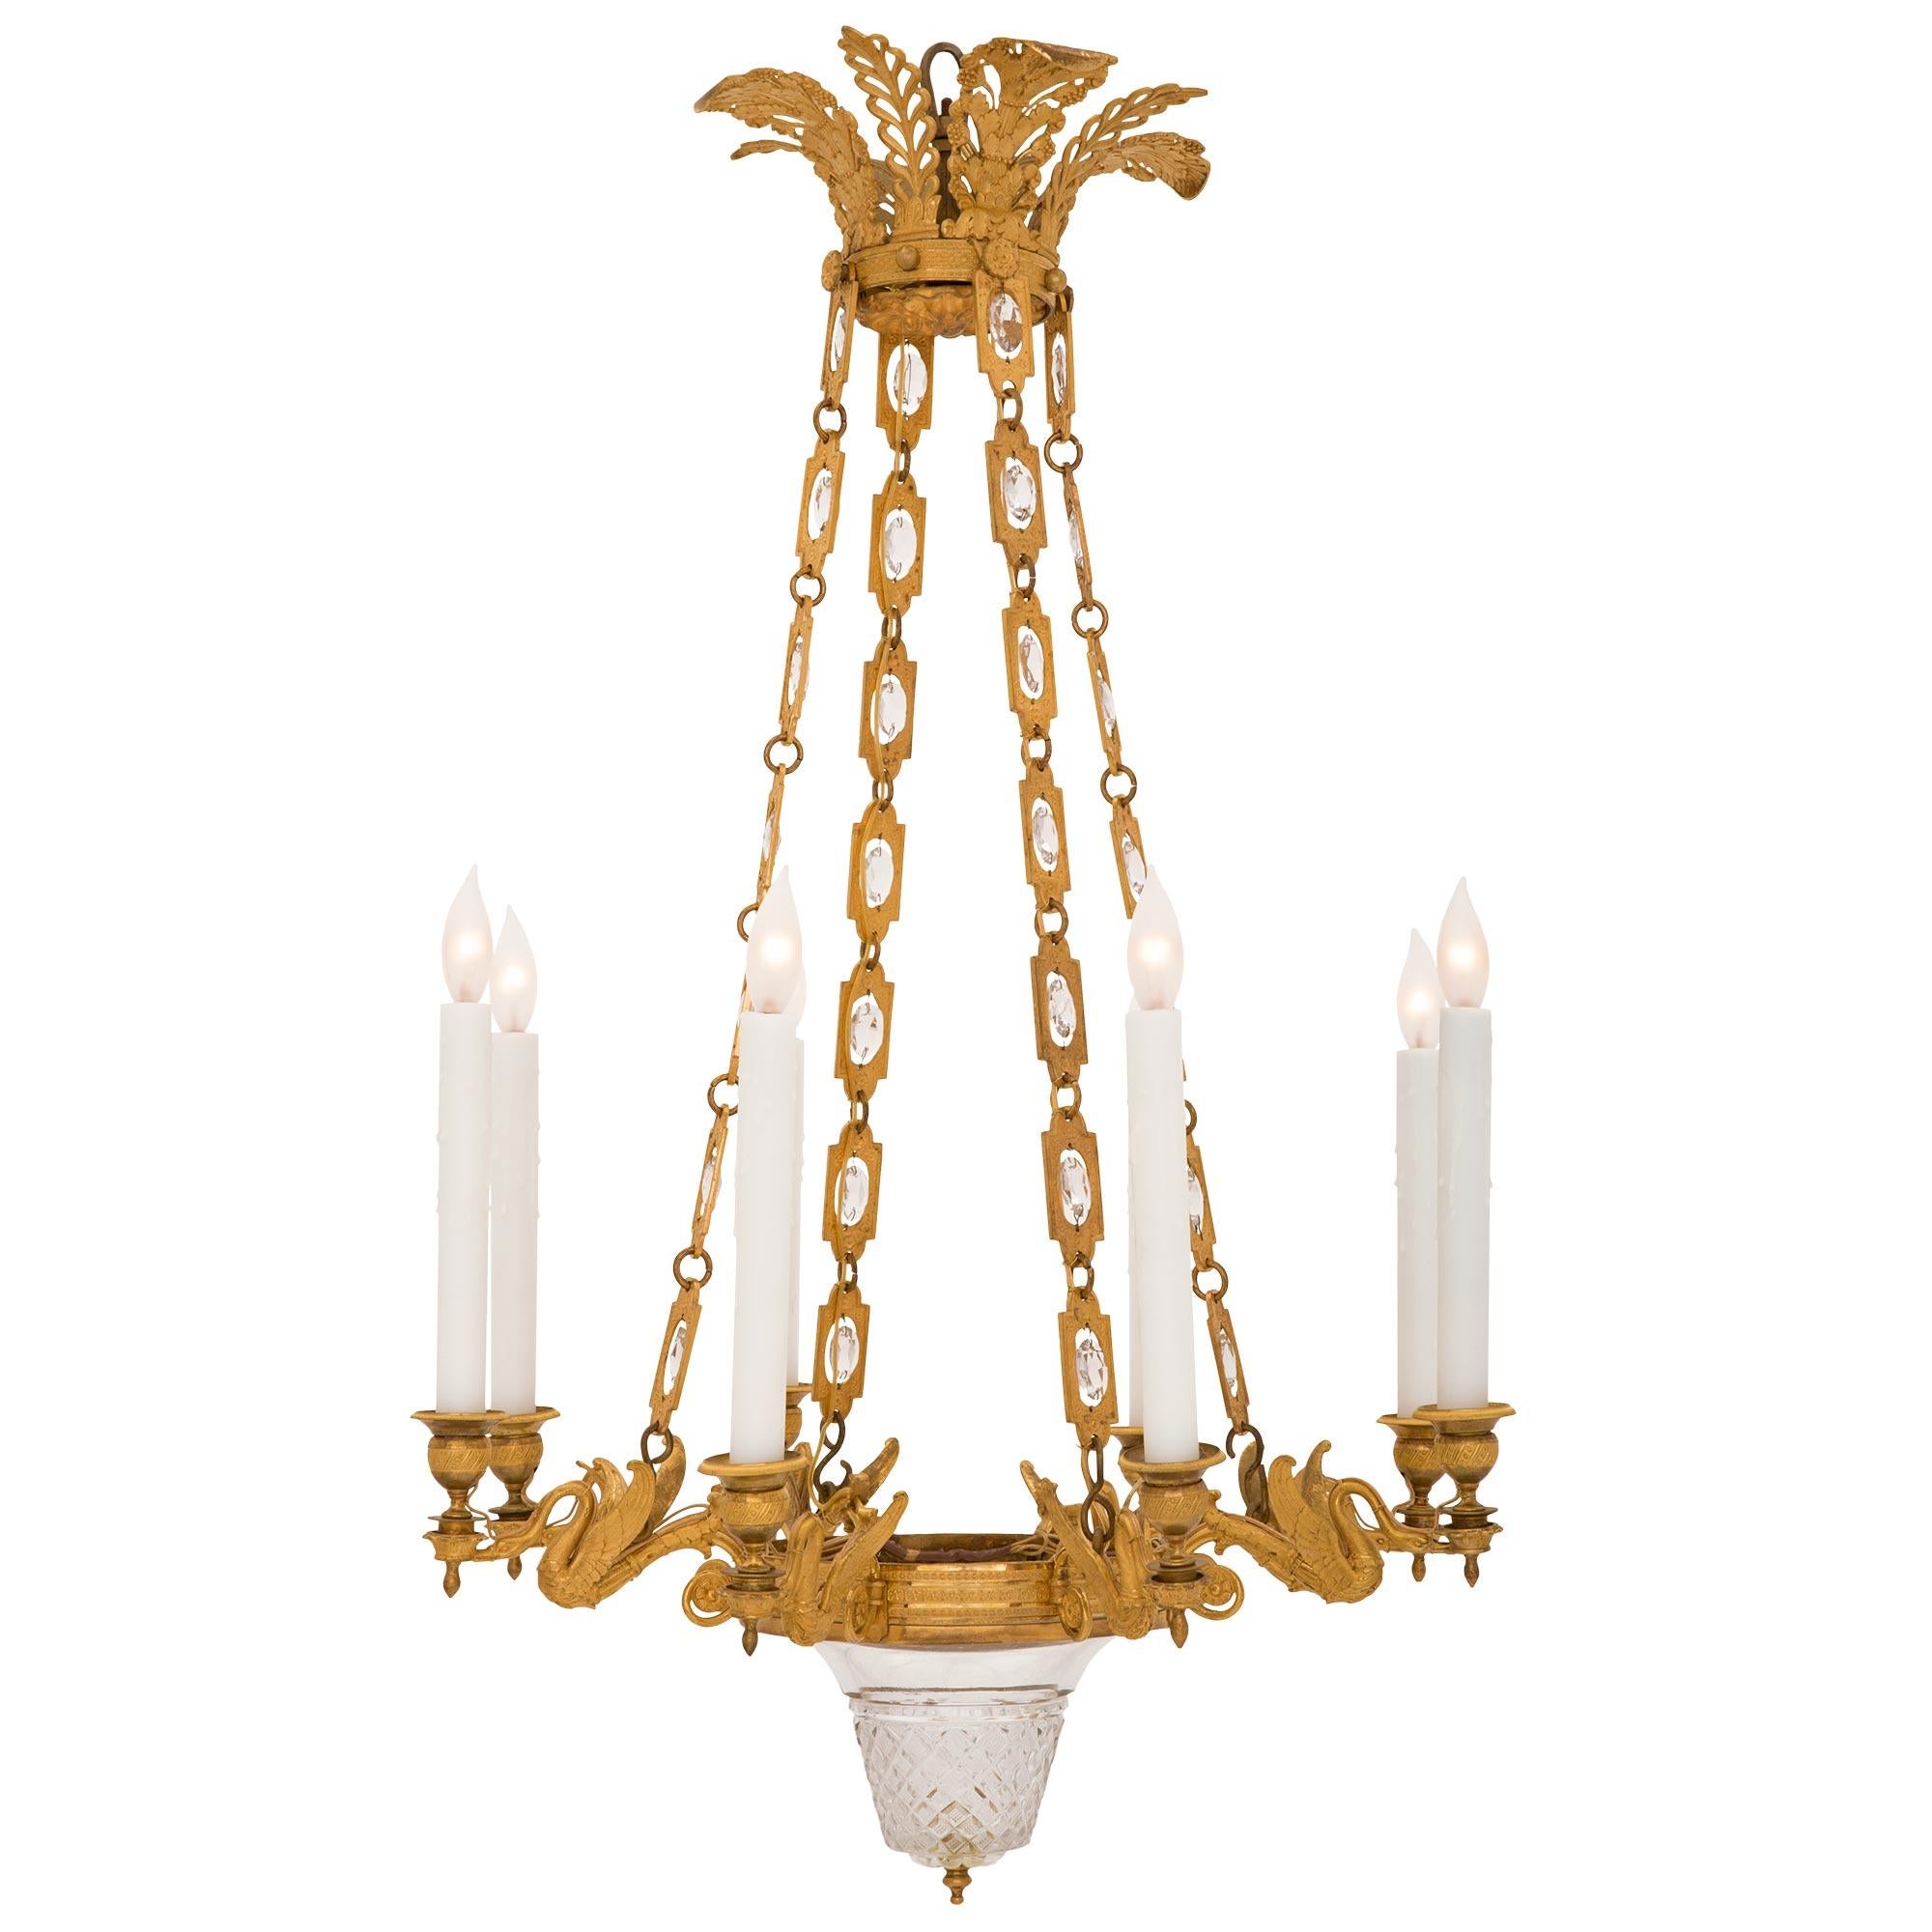 A stunning and extremely high quality French early 19th century 1st Empire period ormolu and Baccarat crystal chandelier, circa 1805. The eight arm chandelier is centered by a striking and most decorative Baccarat crystal bowl with a fine topie